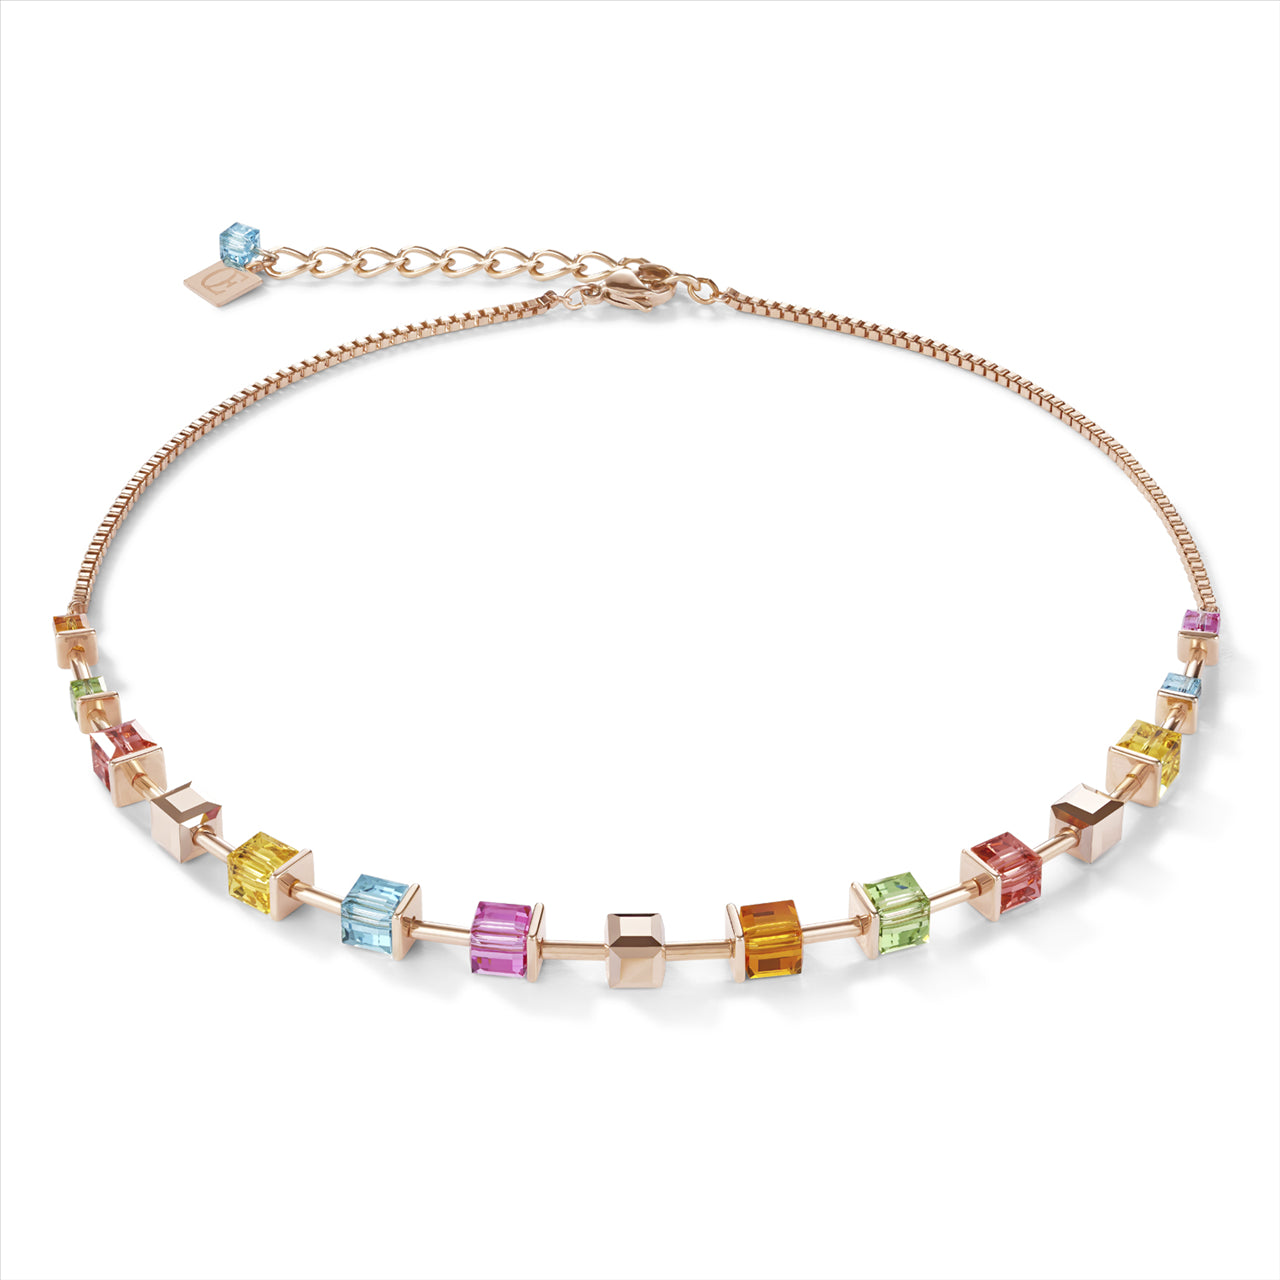 Necklace - CDL - st/st, rose gold plate, with multicoloured & rose gold coloured Swarovski crystals